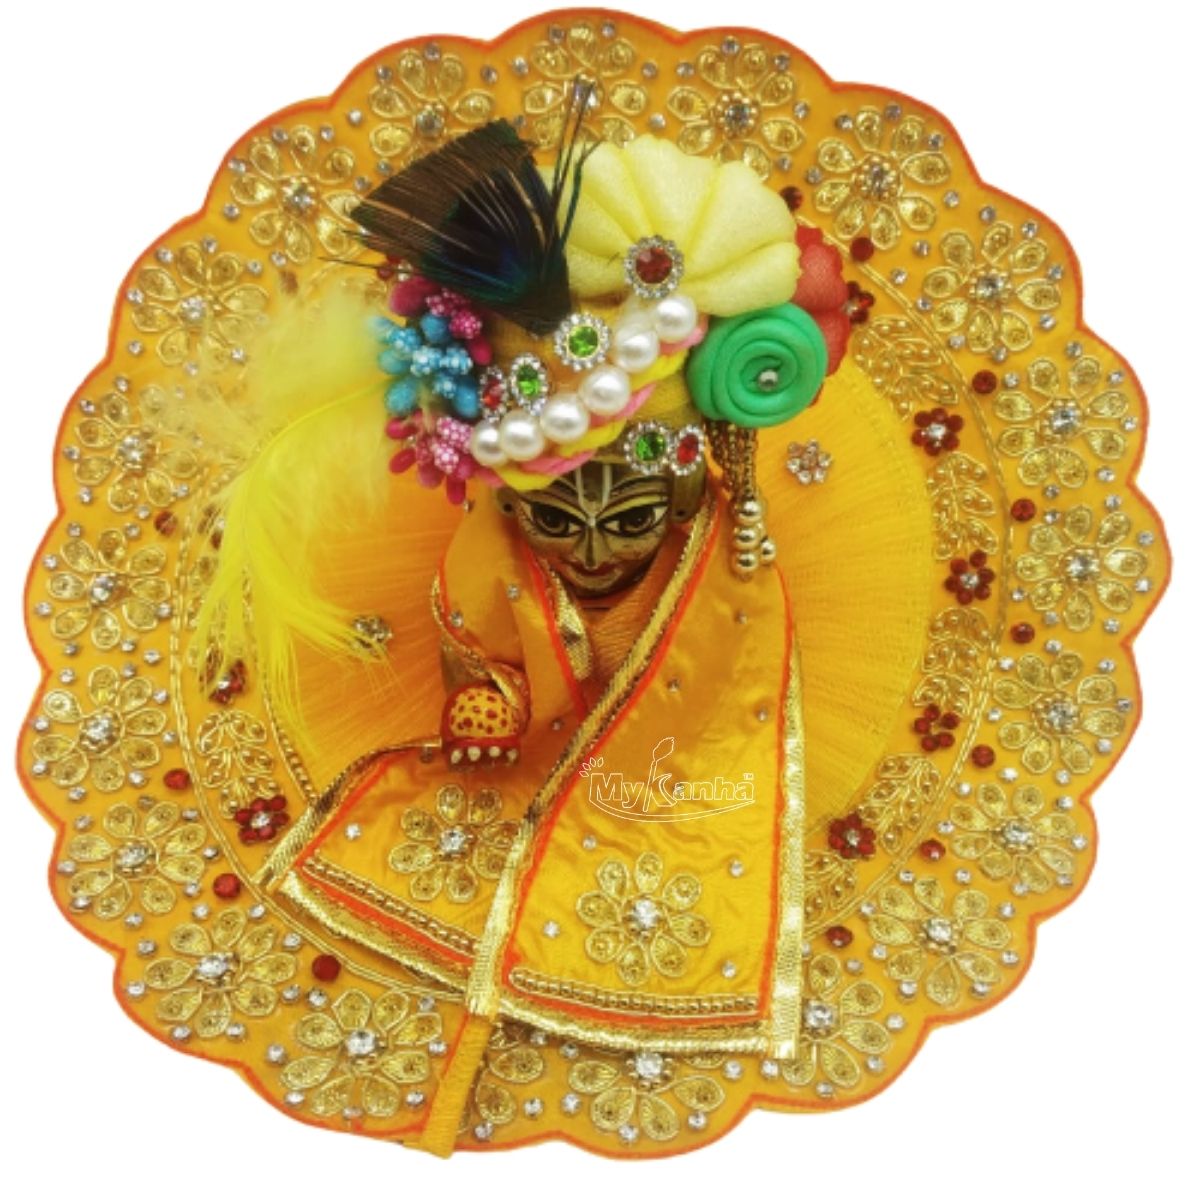 Laddu Gopal Heavy Decorated Yellow Dress with Designer Pagdi